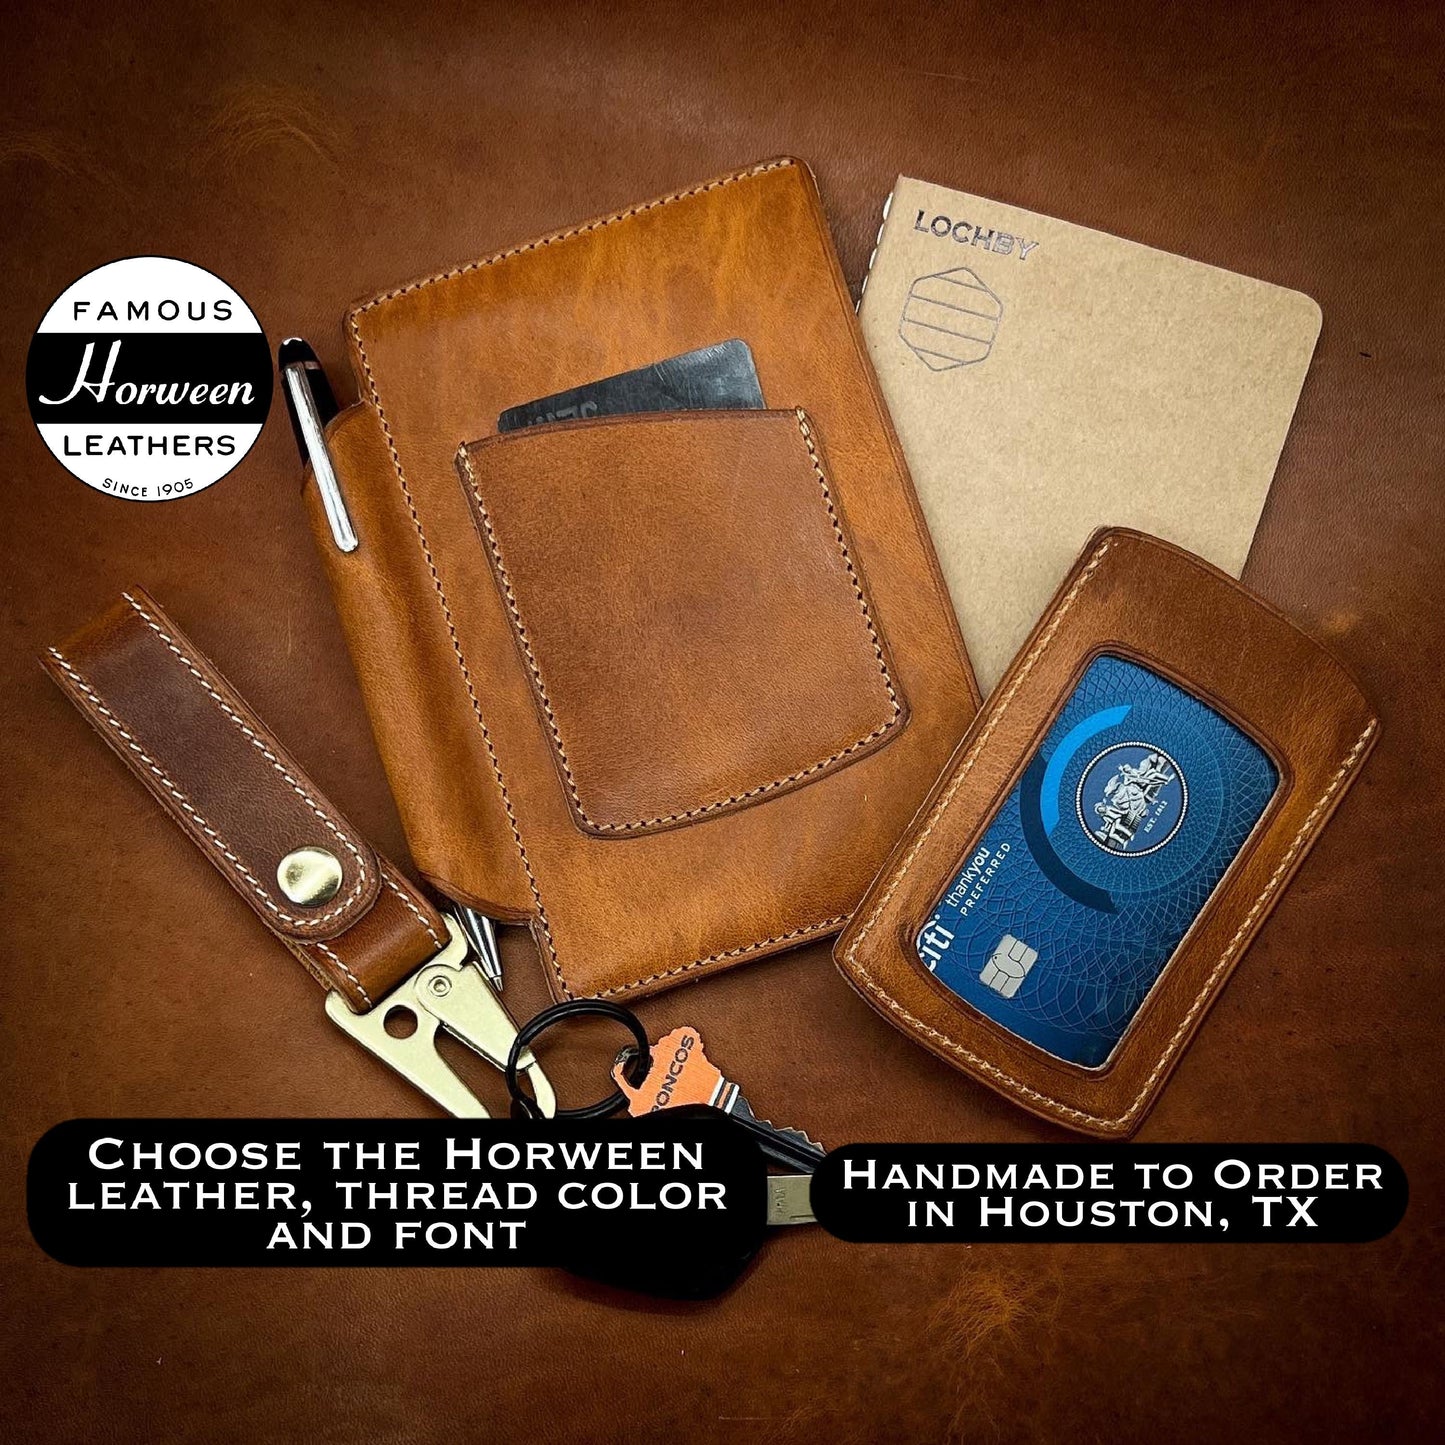 Handmade EDC Goods, Wallets, Keychains in Horween Leather from Houston Texas | Minimalist Front Pocket EDC Wallet | Custom Leather and Pen